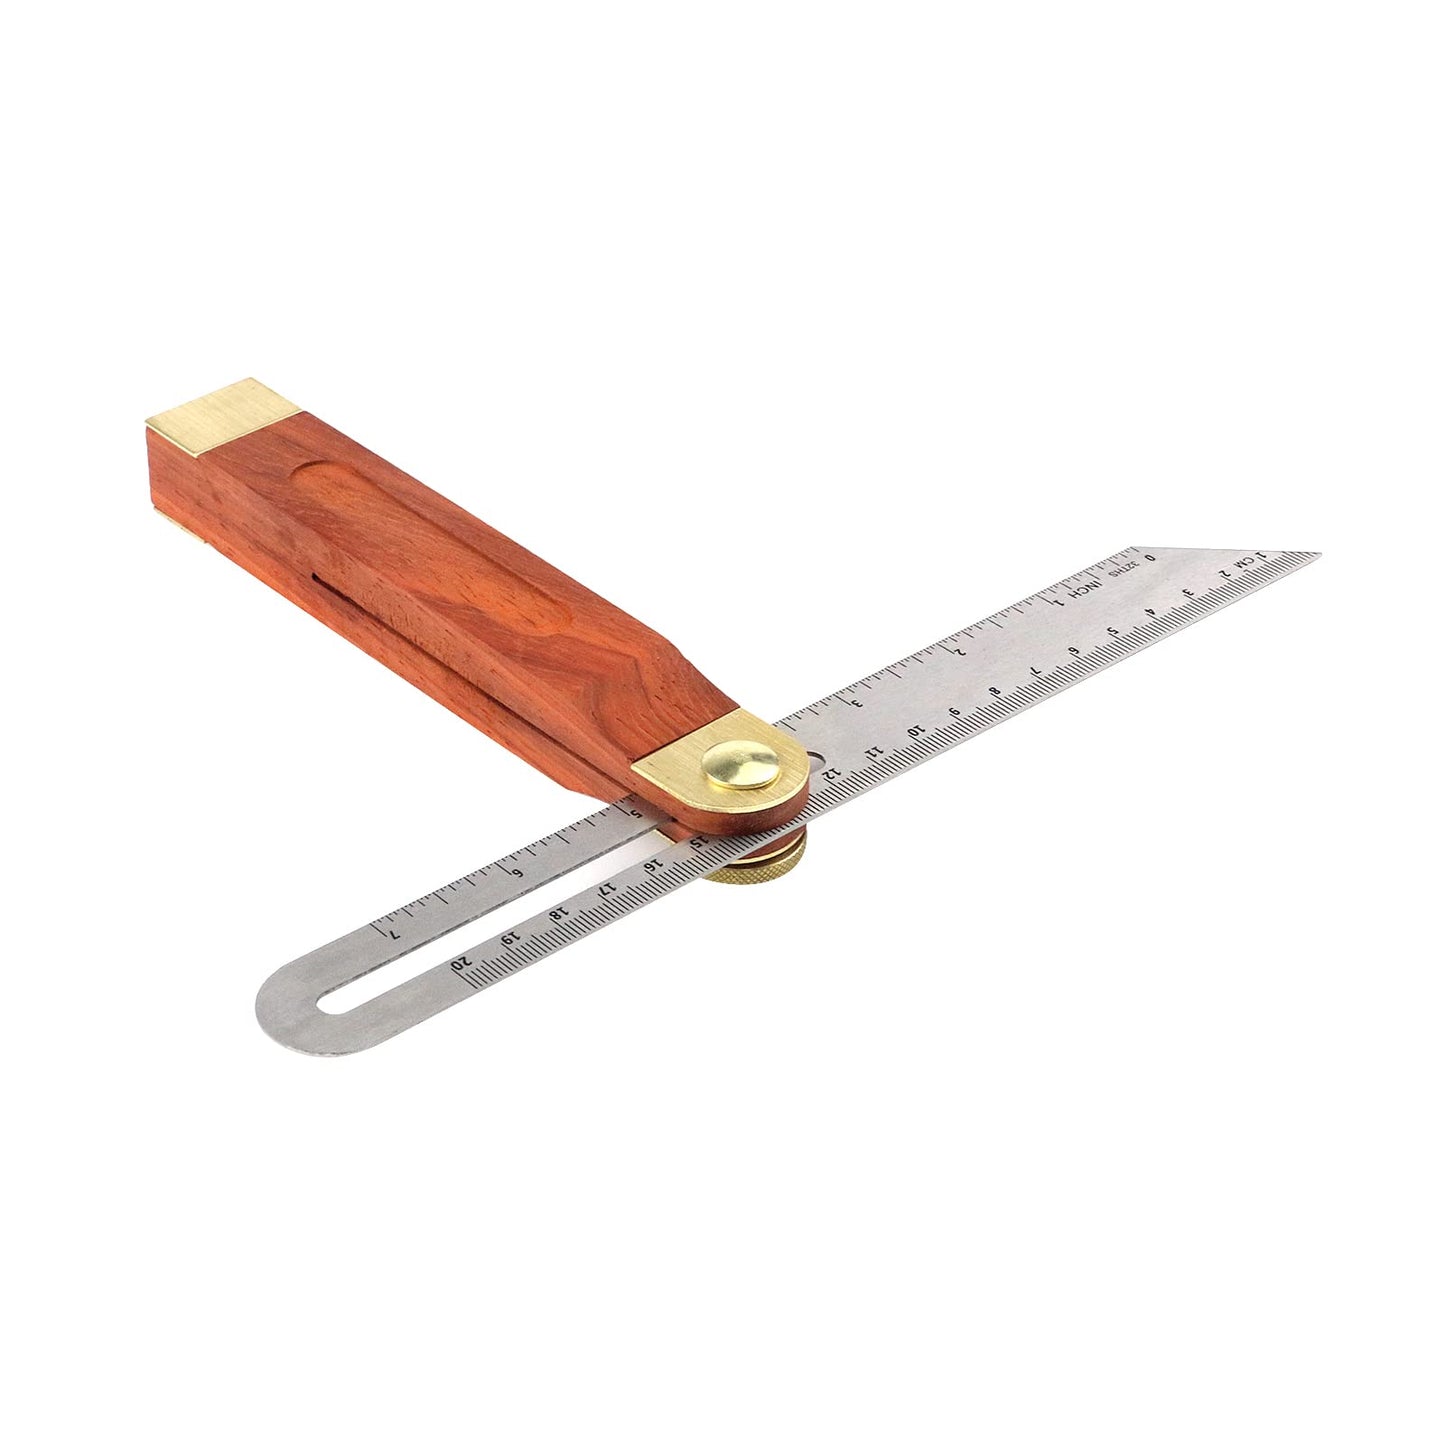 MY MIRONEY 9" T-Bevel Sliding Angle Ruler Protractor Multi Angle Adjustable Gauge Measurement Tool Hardwood Handle with Metric & Imperial Marks